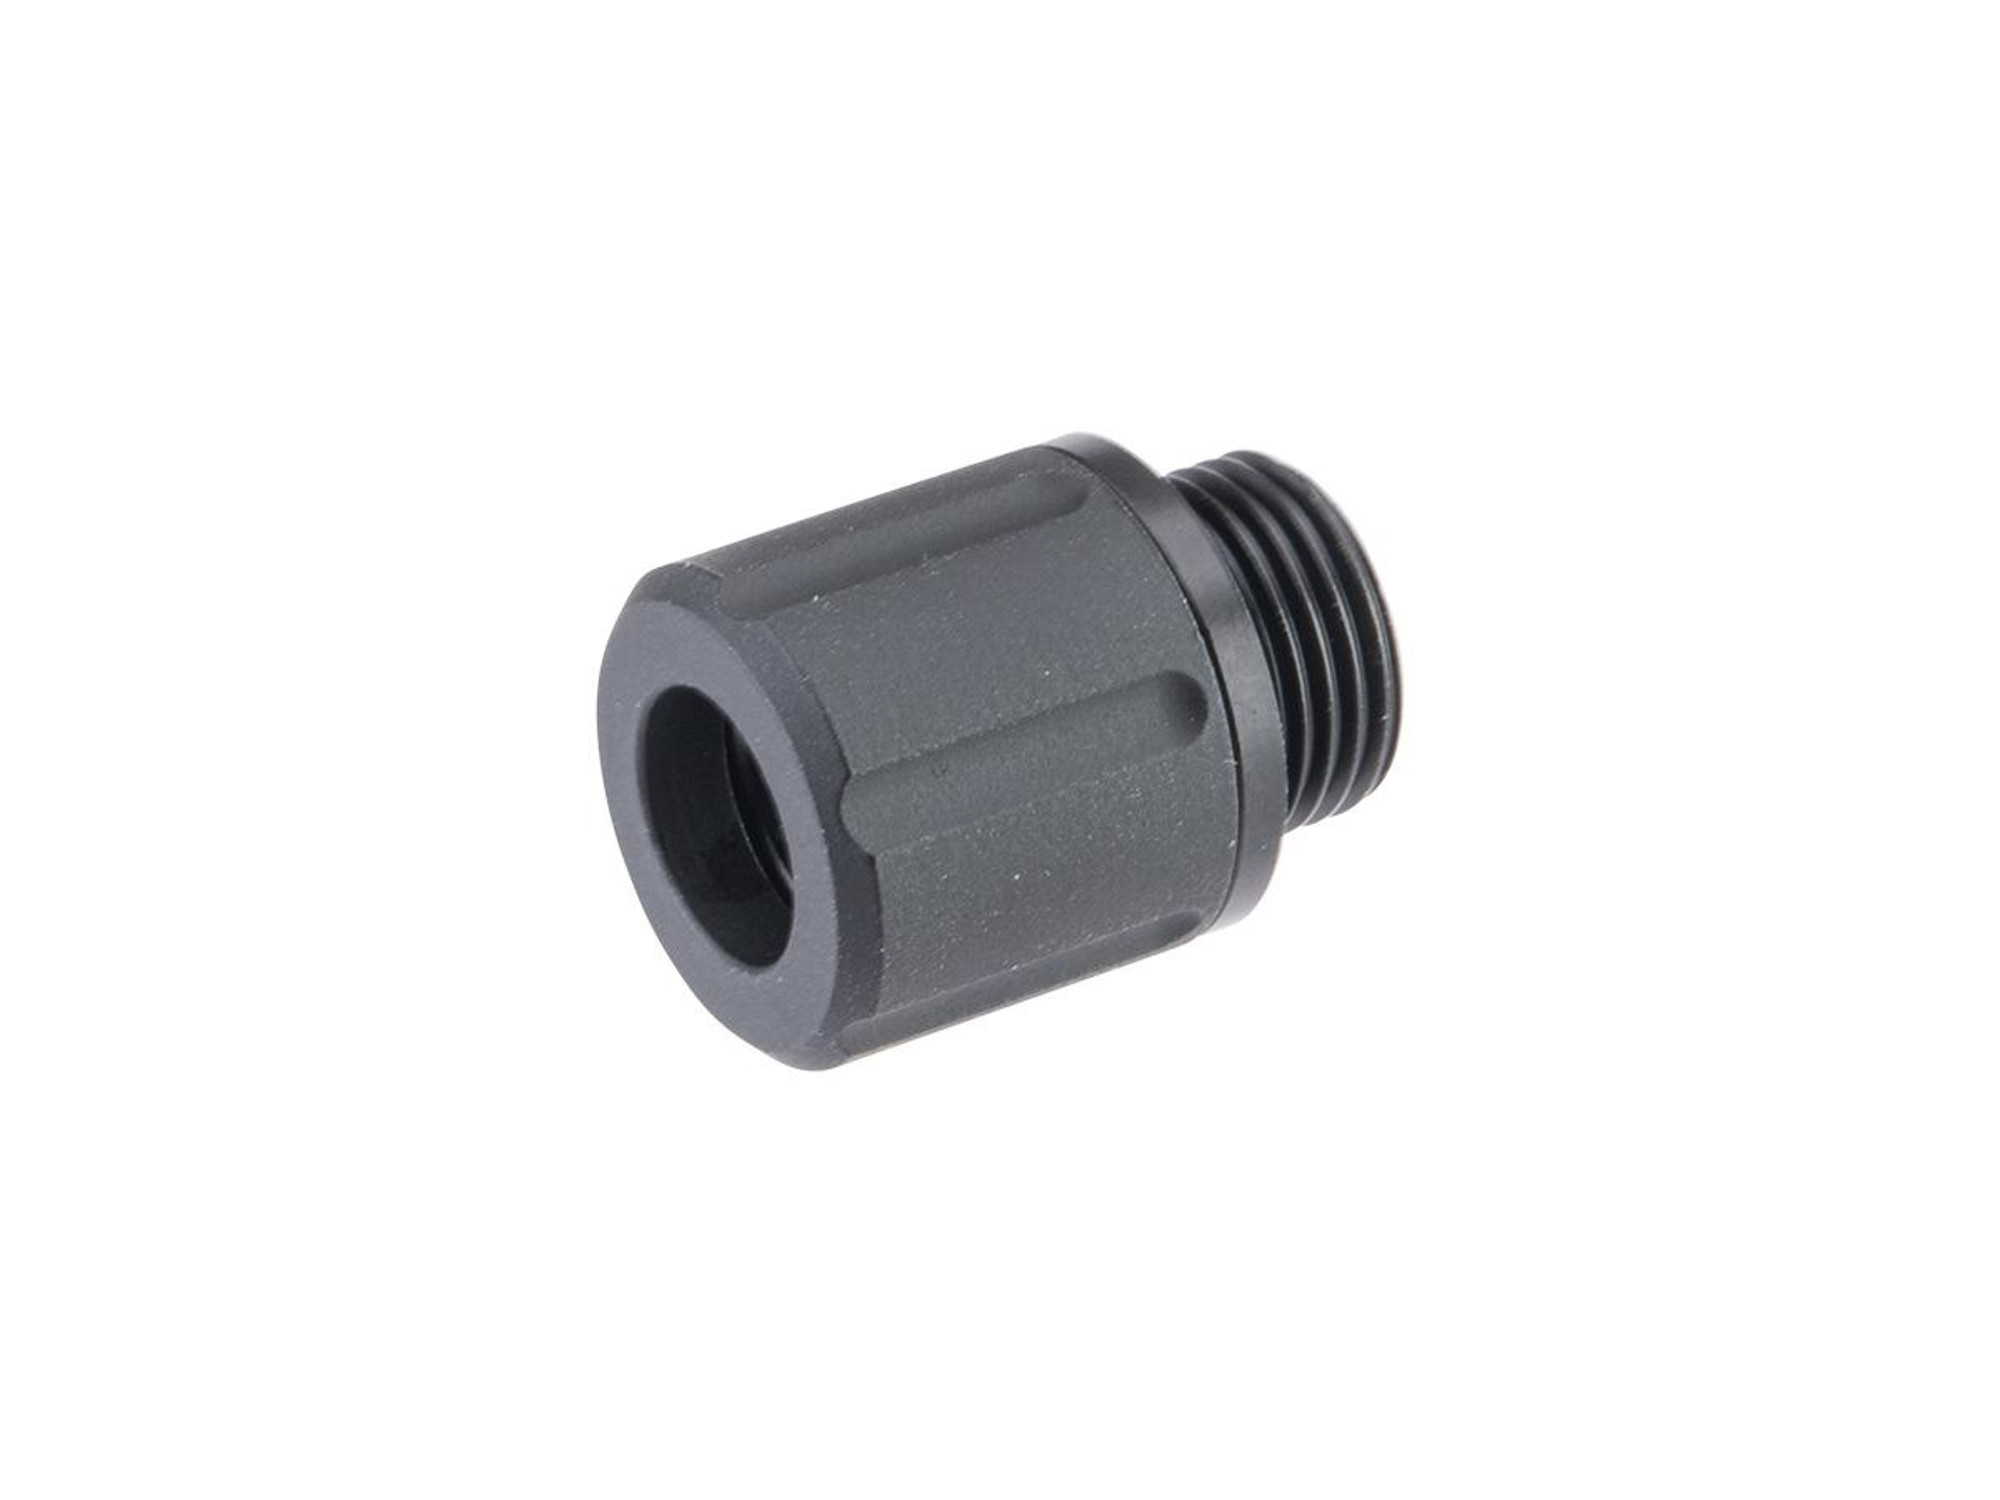 APS "Type II" 4mm Negative Thread Adapter w/ Thread Protector for ACP and BSF-19 Gas Blowback Airsoft Pistols